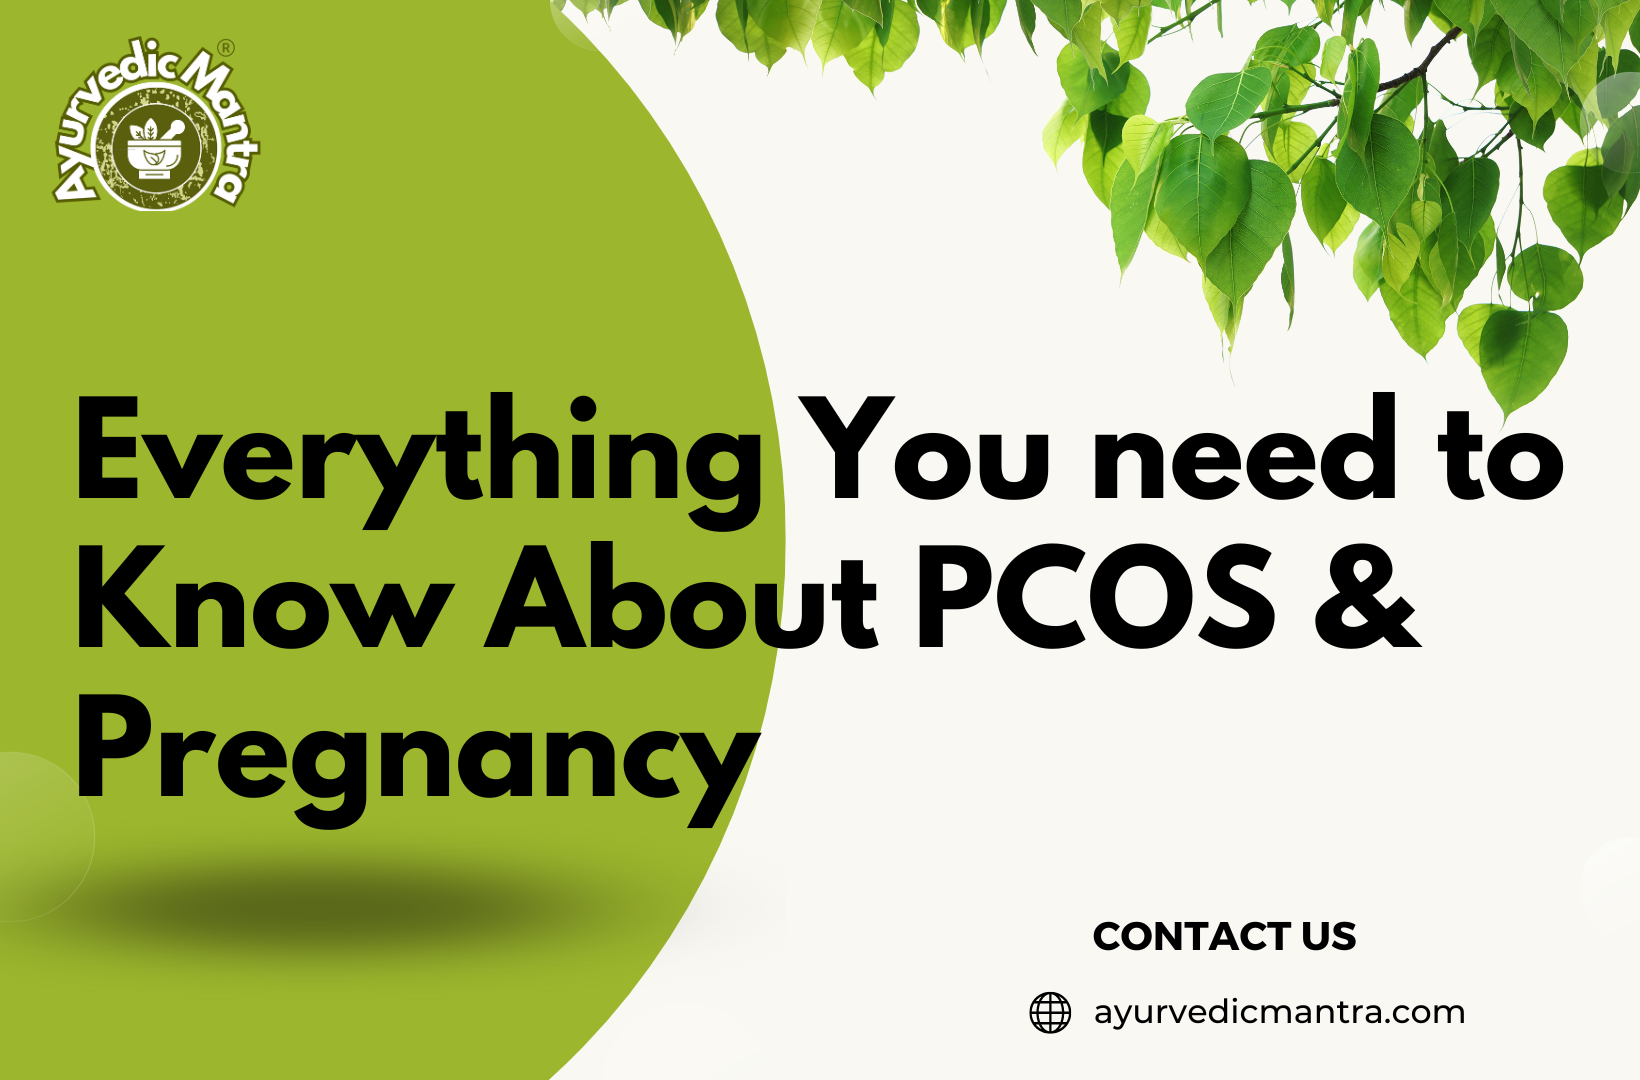 Everything You need to Know About PCOS & Pregnancy